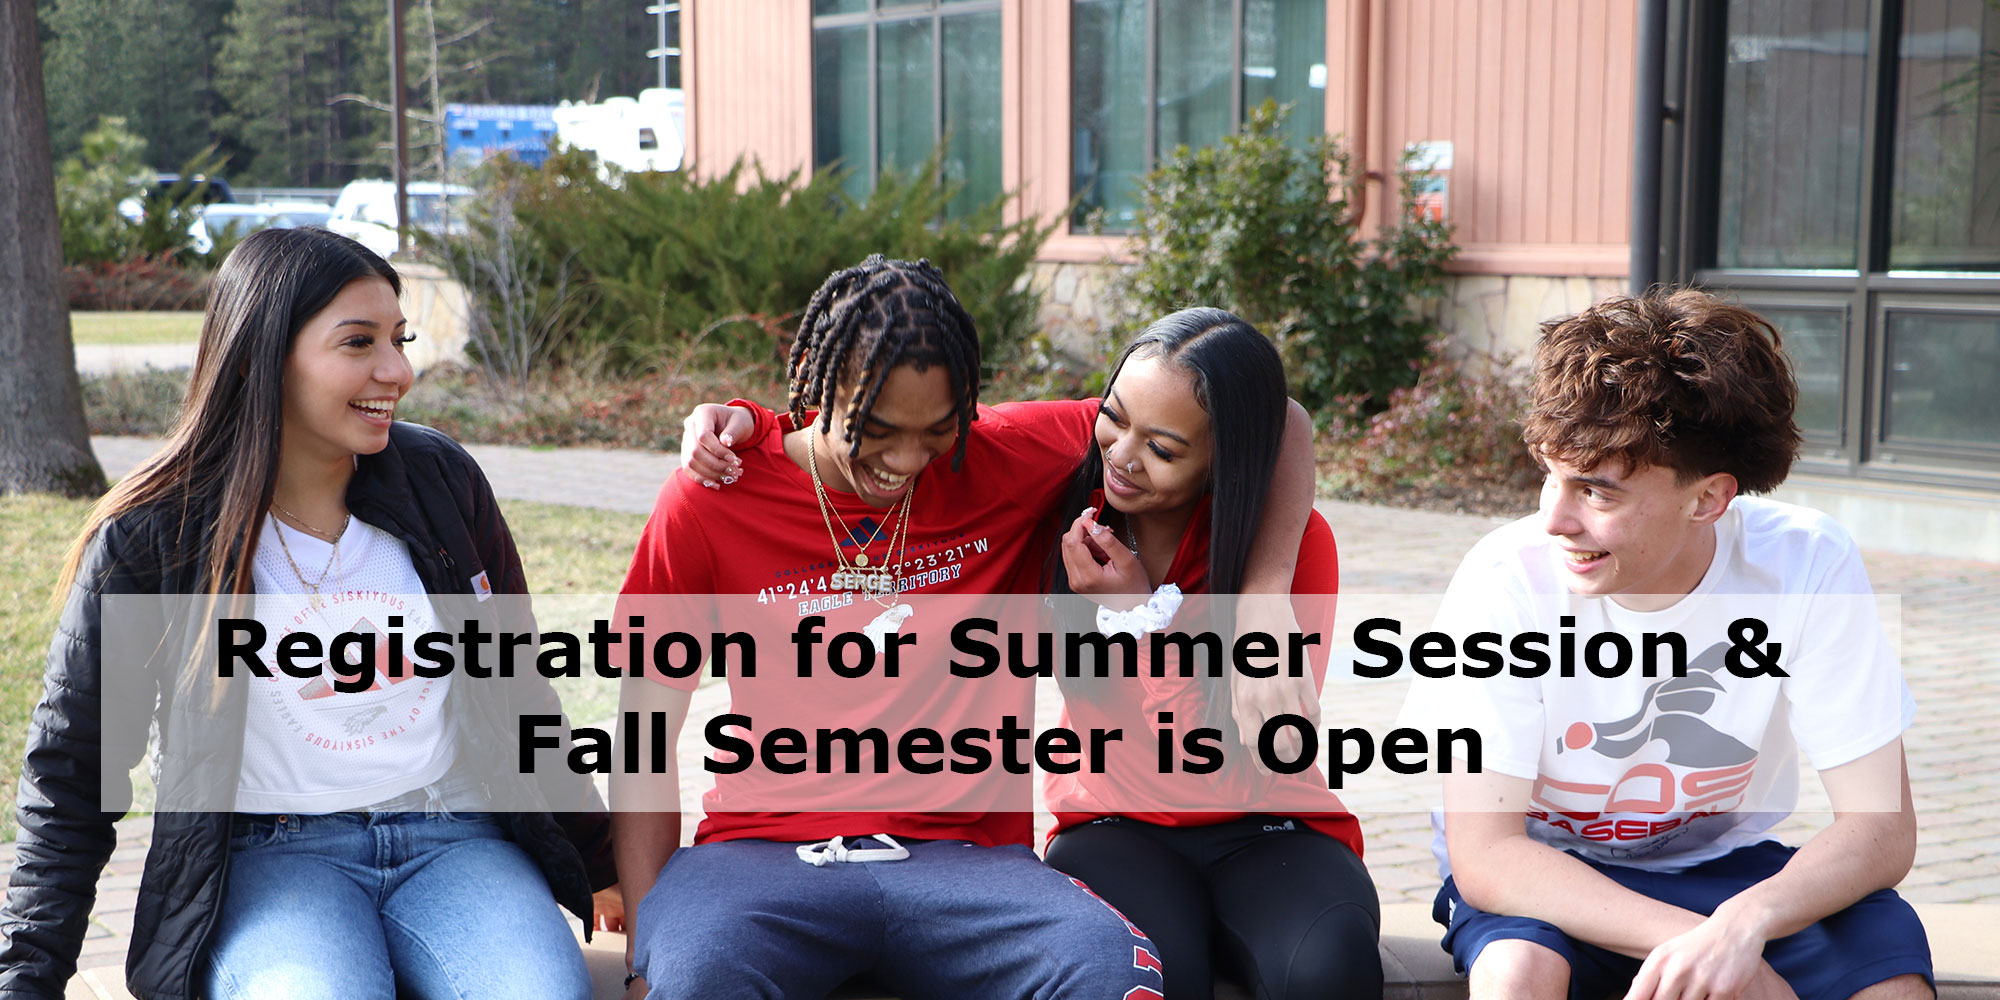 Registration for Summer Session & Fall Semester is Open.